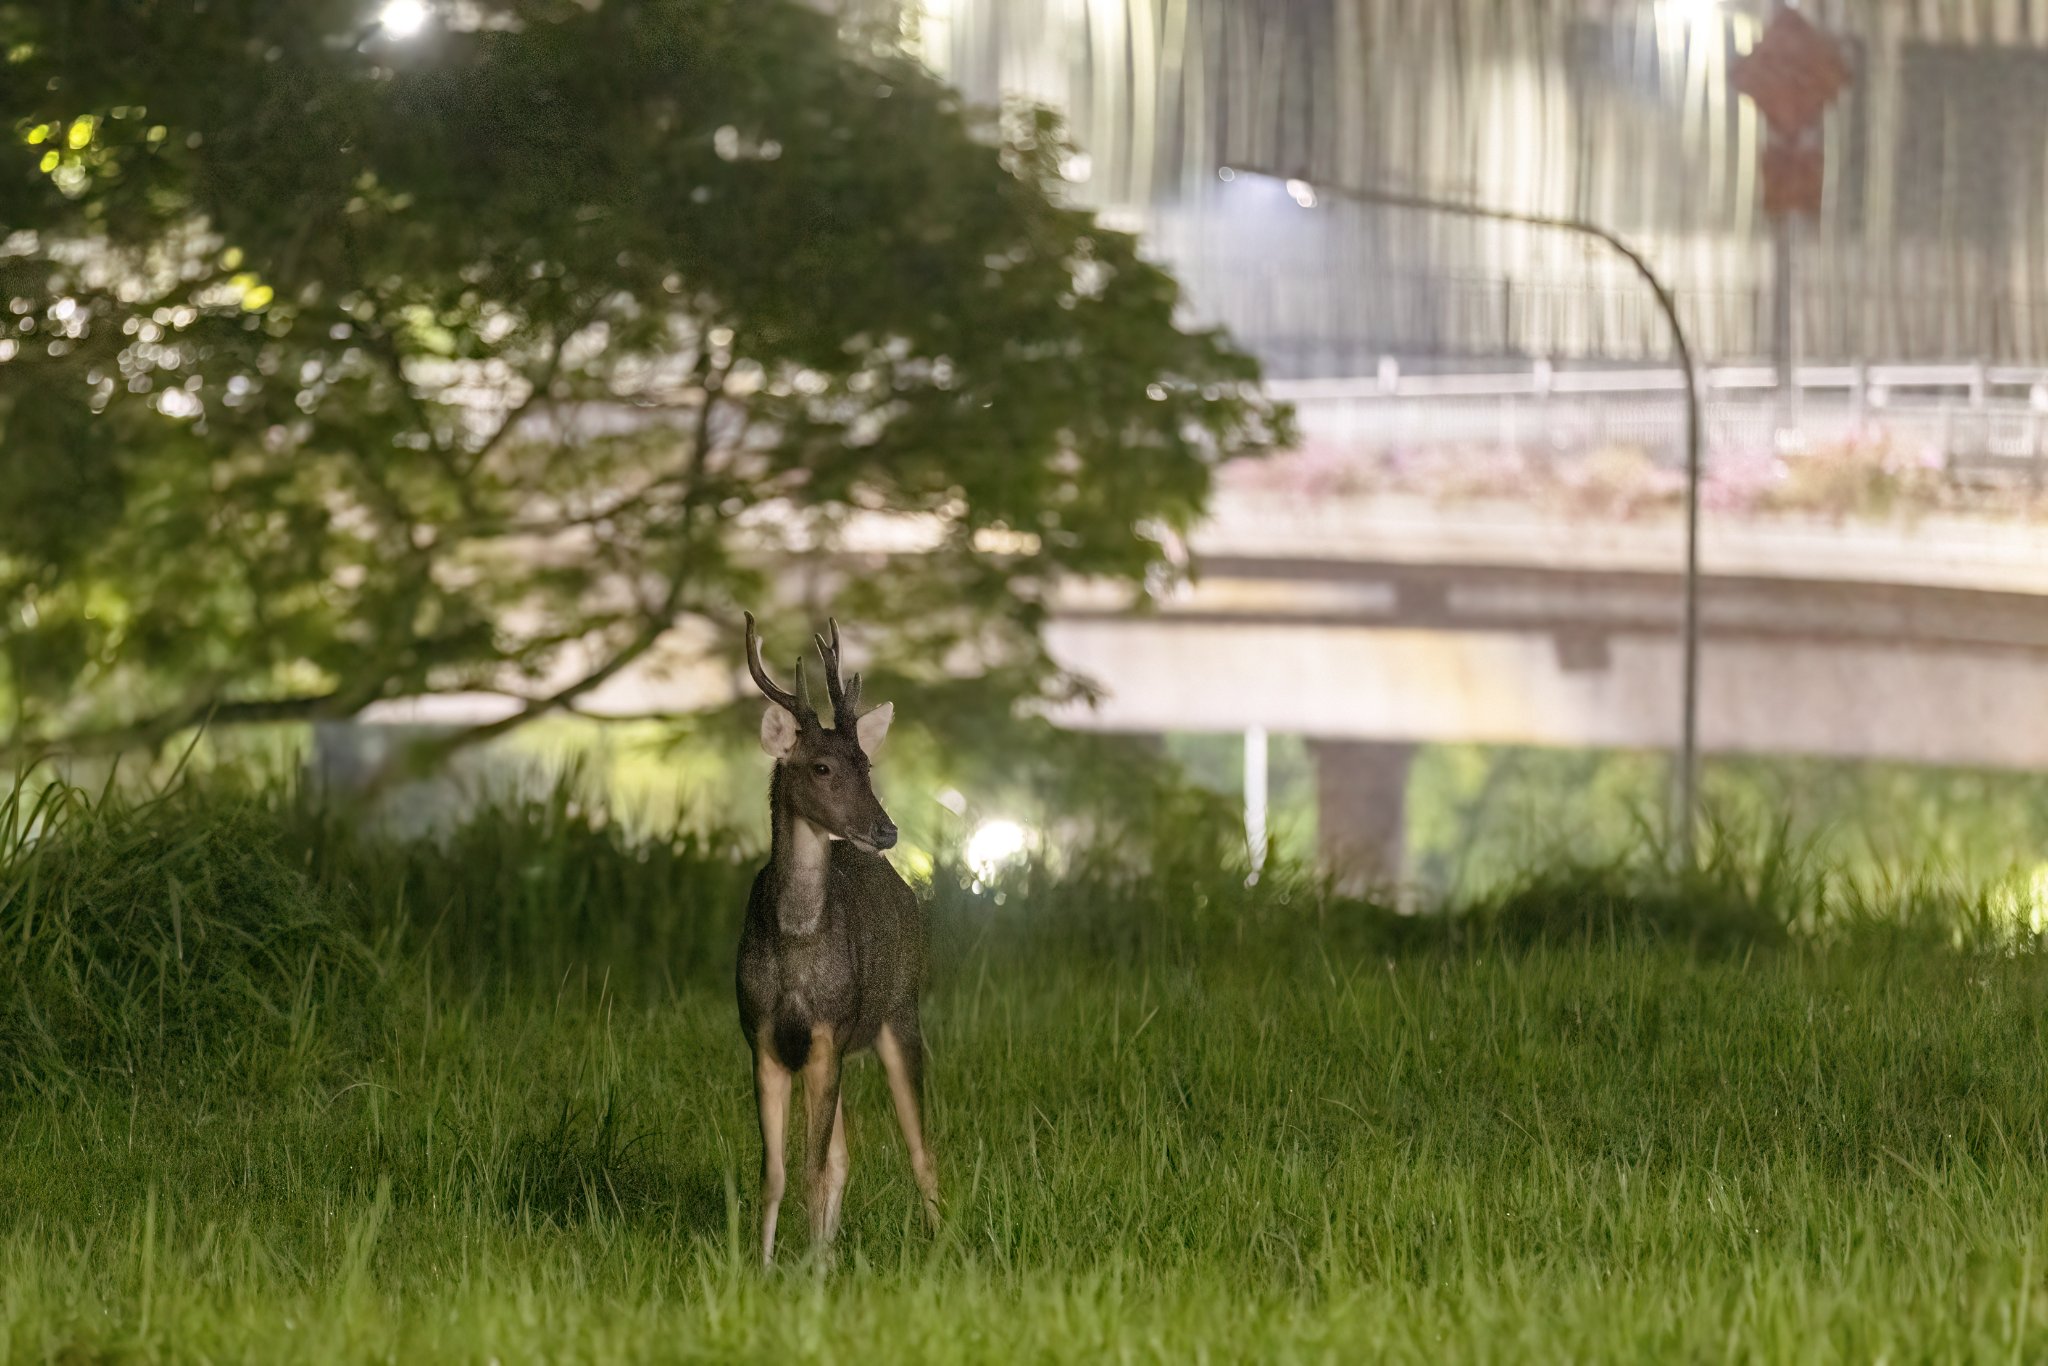 S'pore photographer captures majestic Sambar deer posing under street  lights  - News from Singapore, Asia and around the world